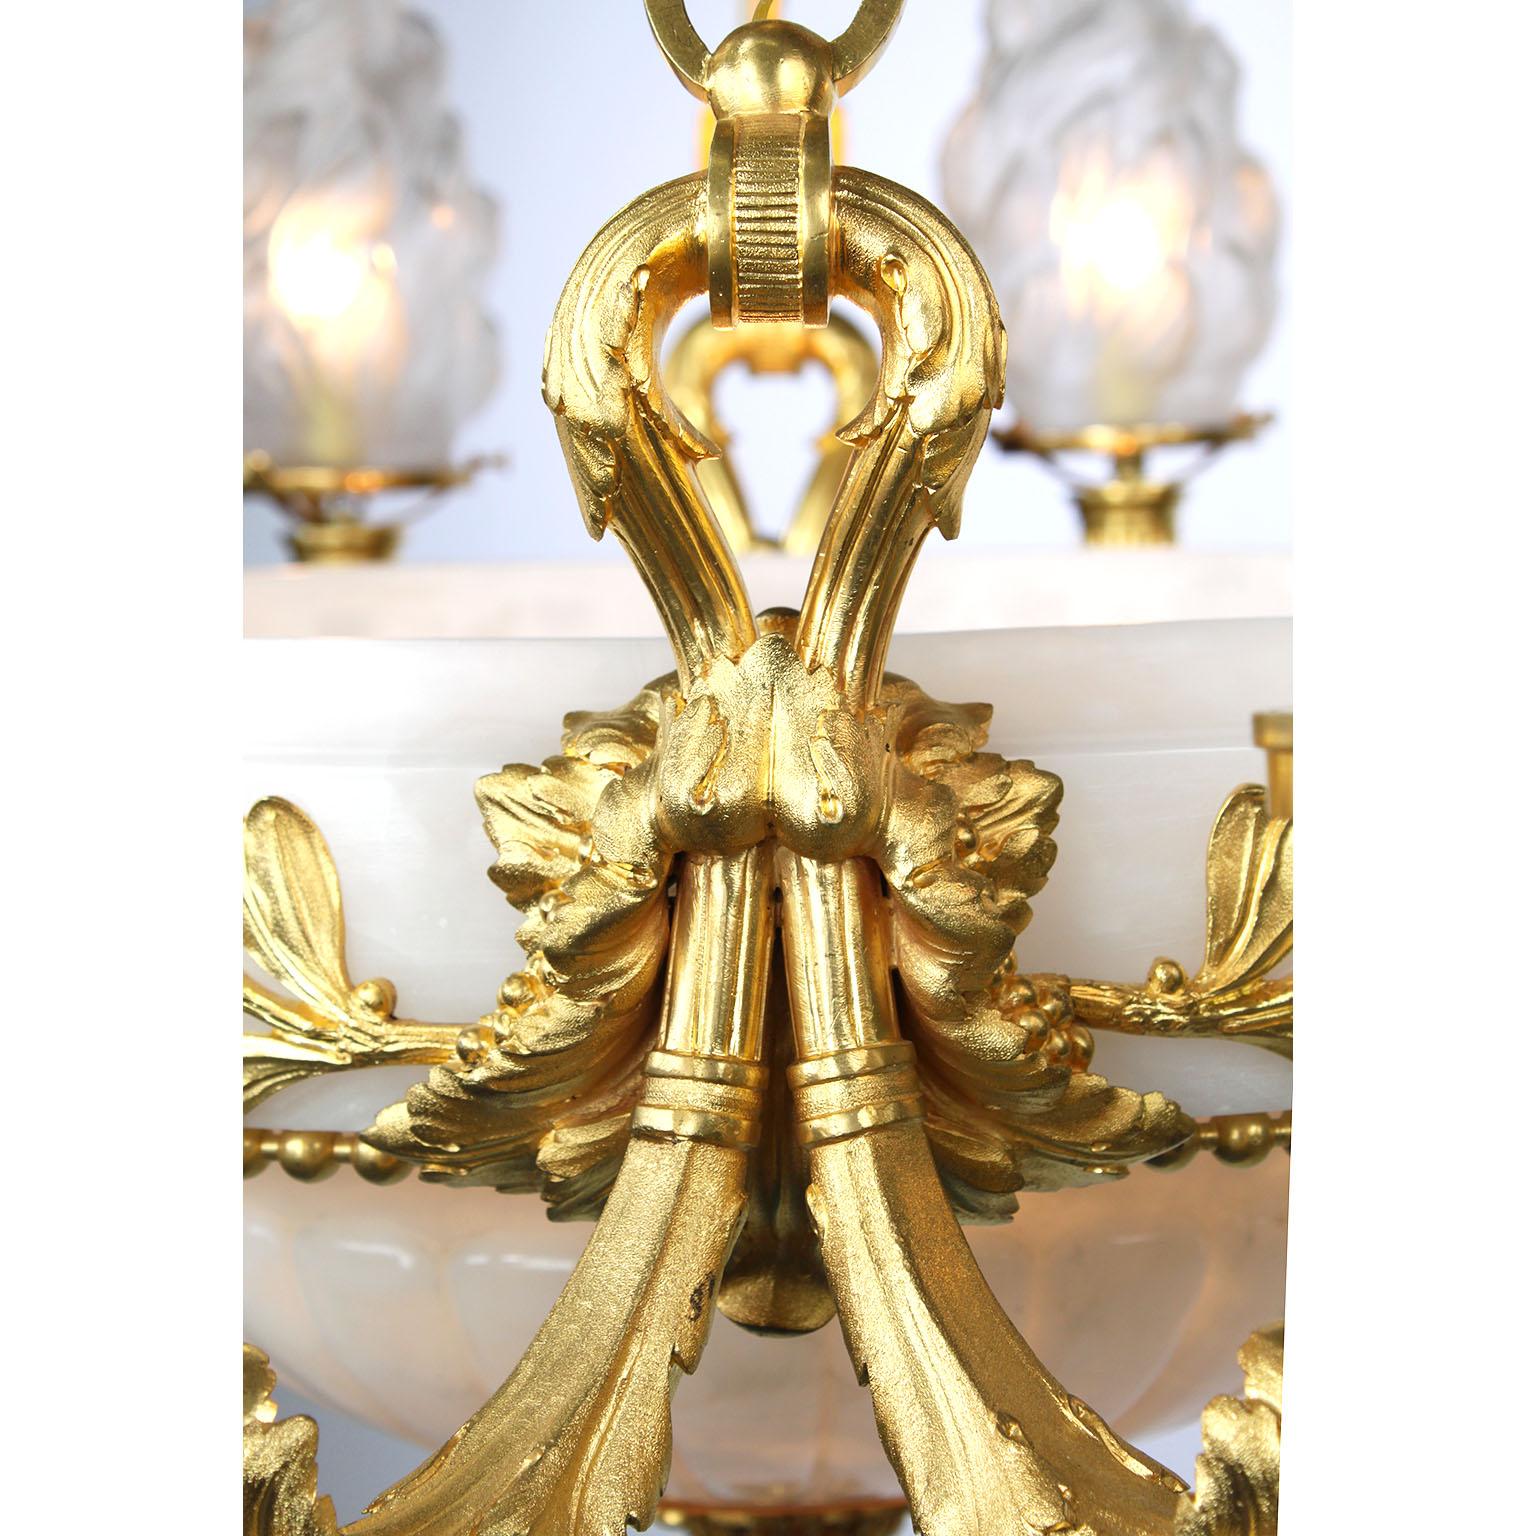 19th Century Franco-Russian Neoclassical Style Ormolu & Alabaster Chandelier In Good Condition For Sale In Los Angeles, CA